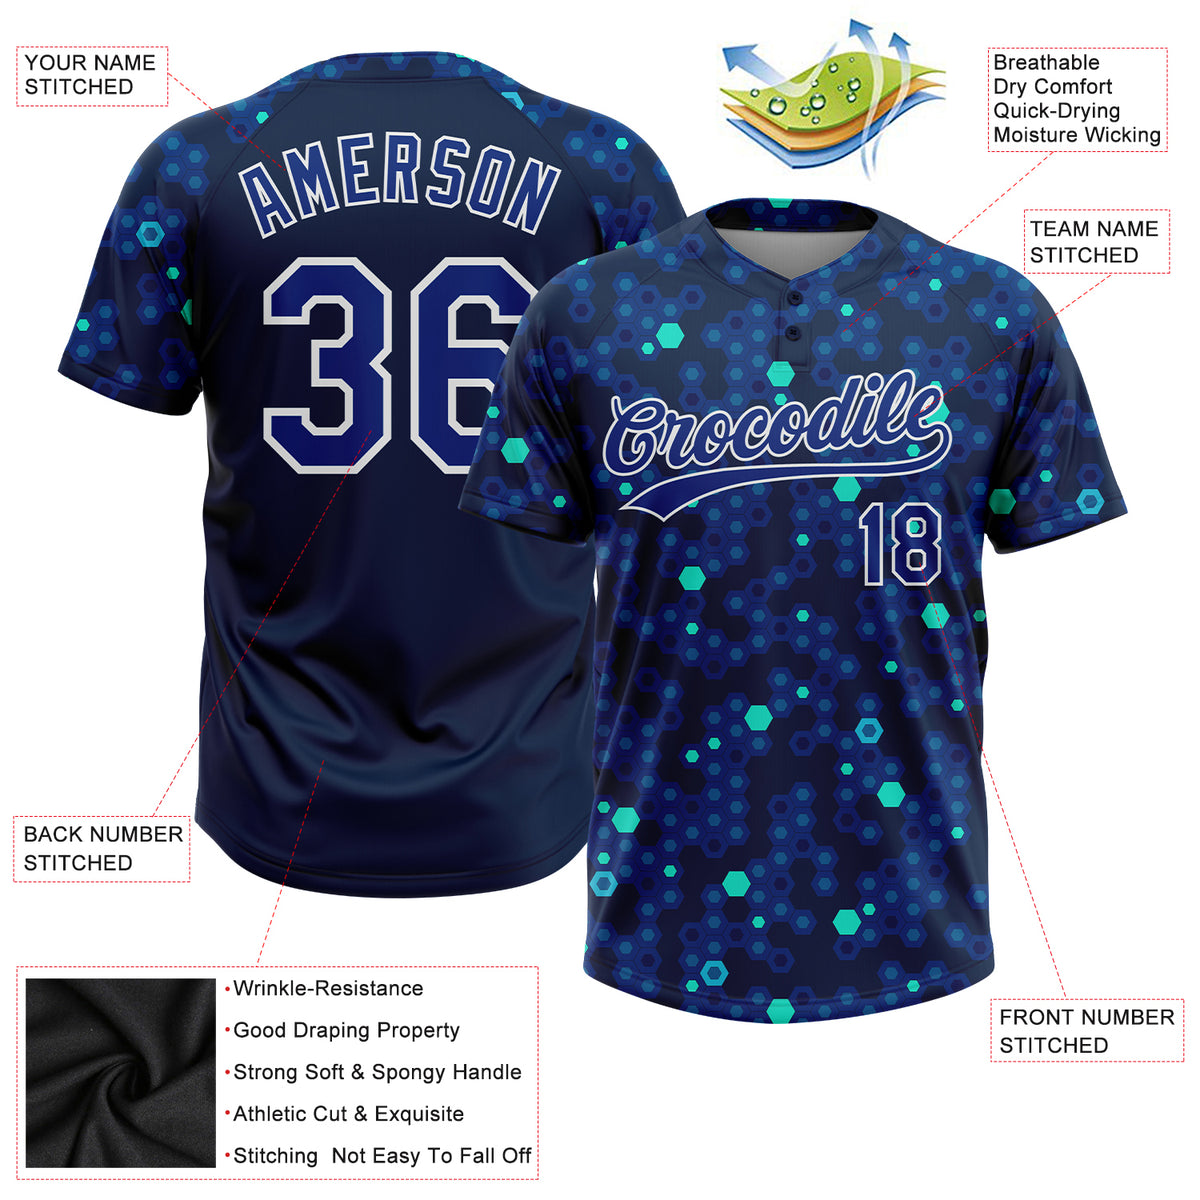 Two-Button Softball Jersey - Hornets Style